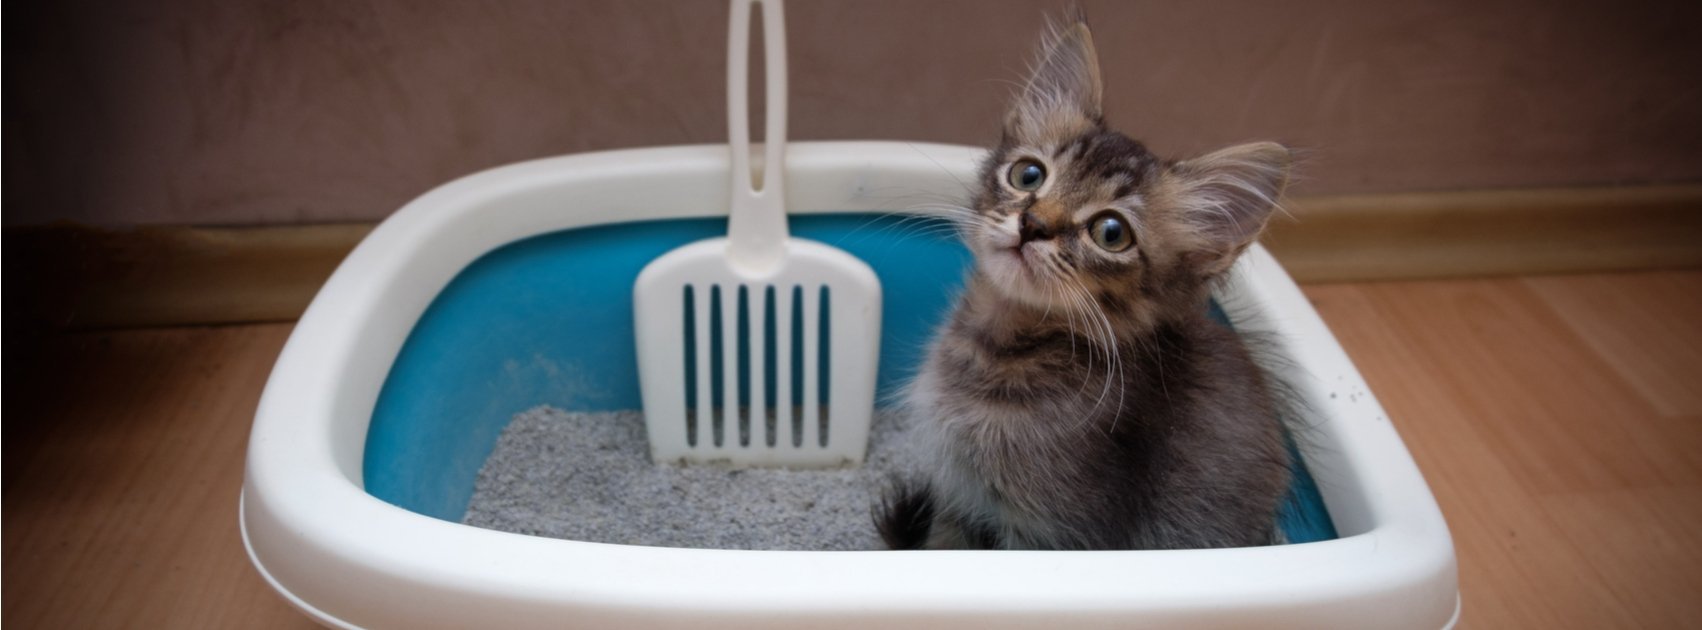 Litter Box Training and Maintenance for Cat Owners